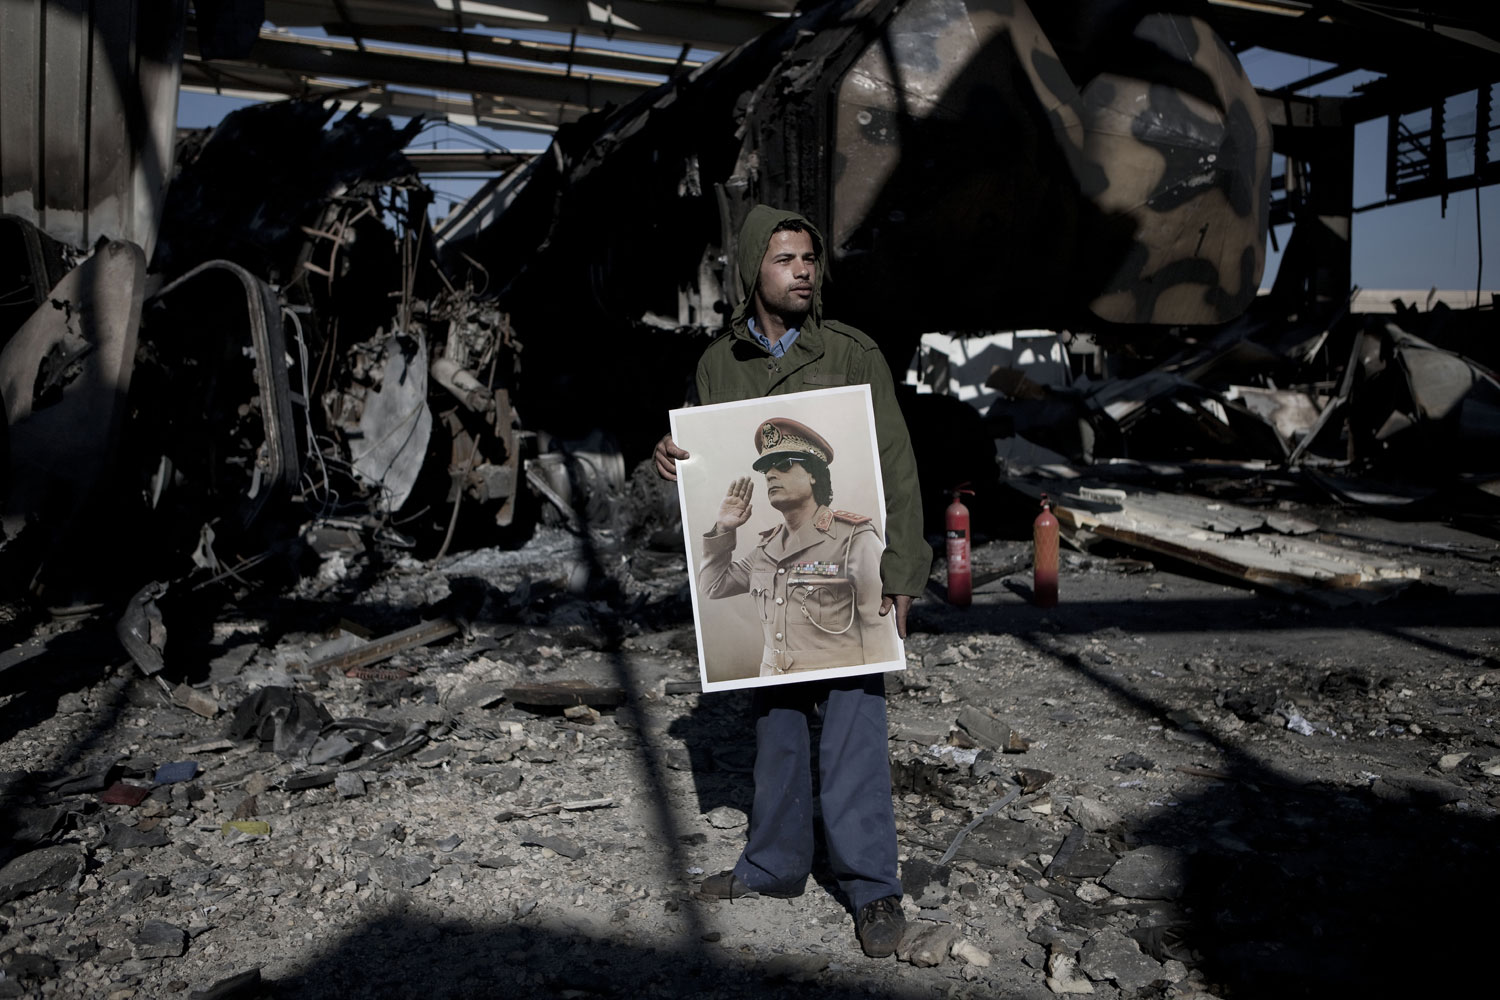 A Gaddafi supporter holds a portrait of the Libyan leader for the media during a tour of a building struck by missiles, March 22, 2011.